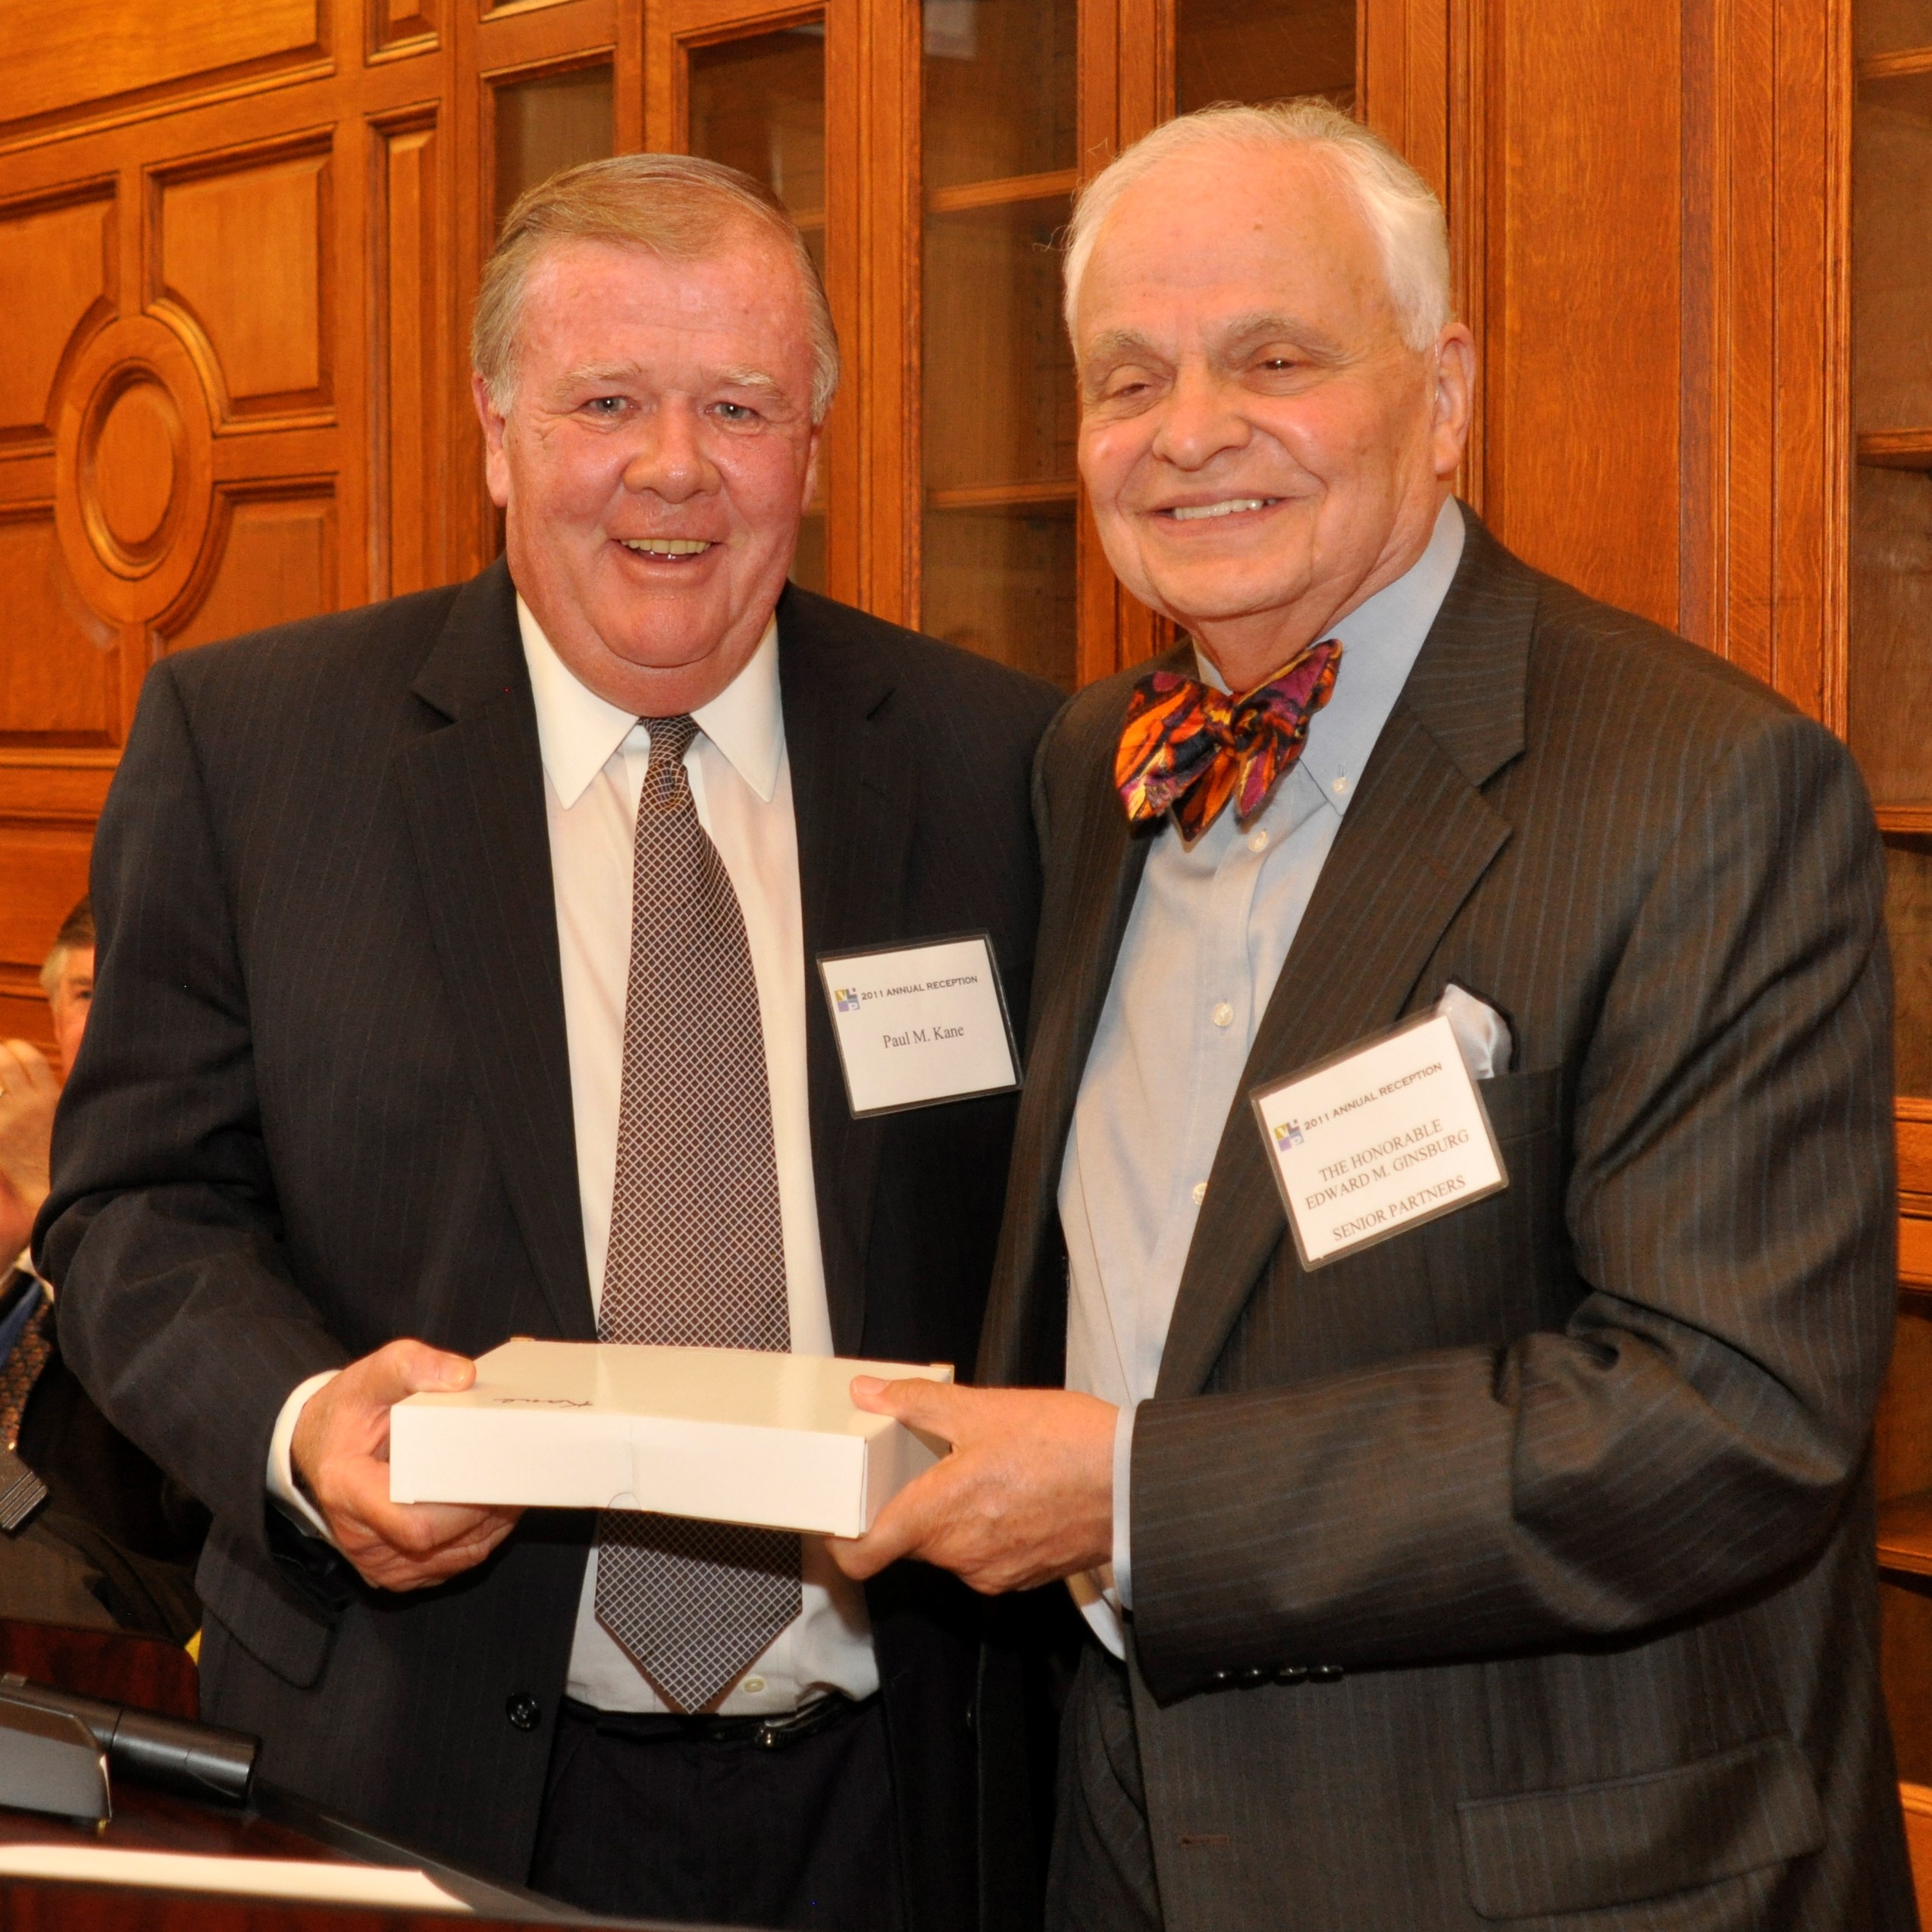 Photo of Paul Kane receiving the 2011 Gideon Trumpet Award from Judge Ginsburg